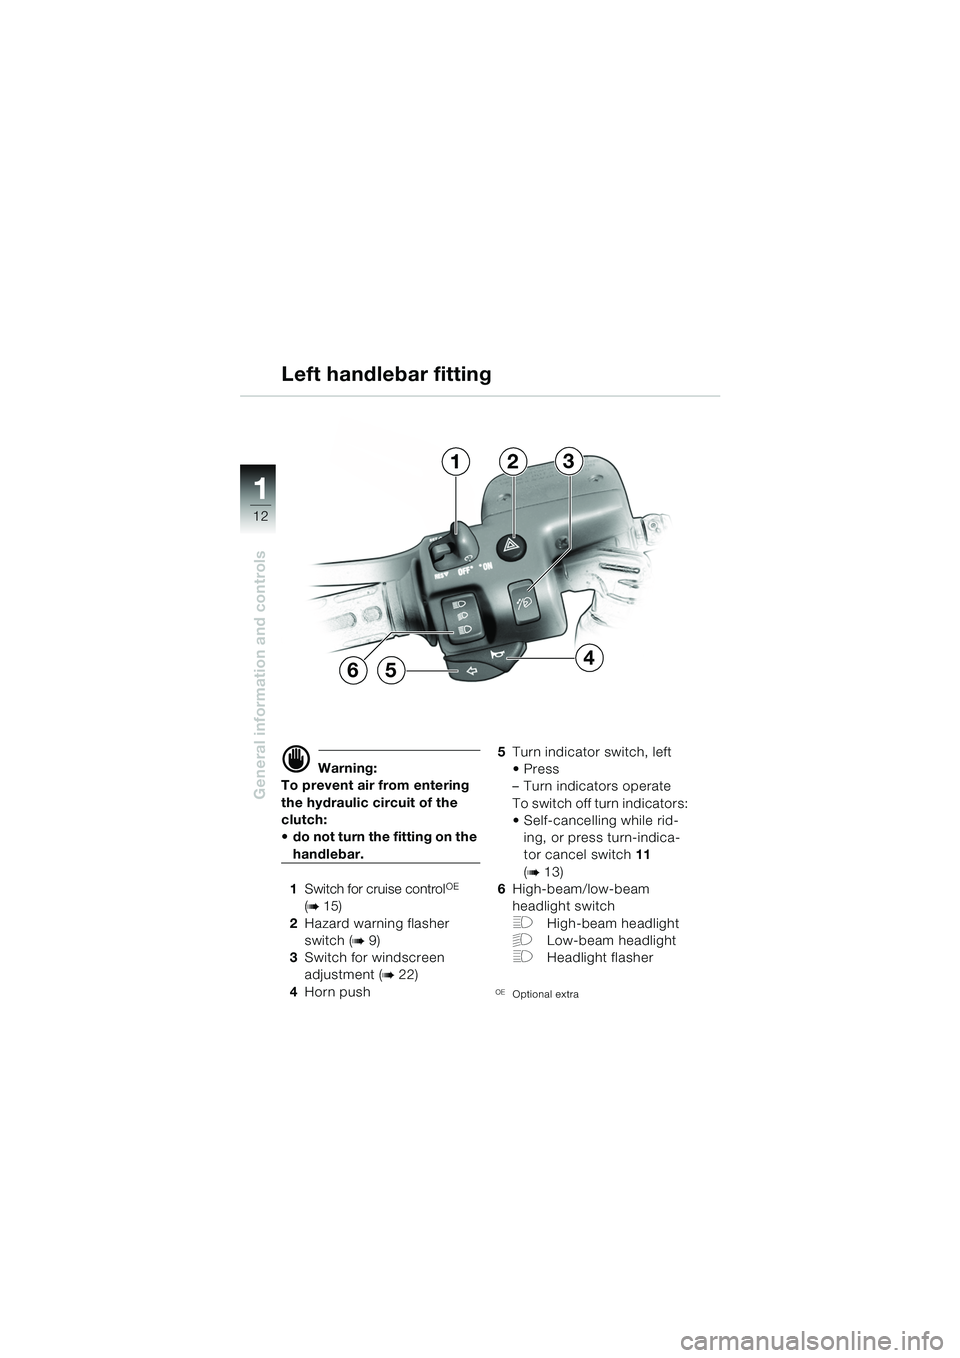 BMW MOTORRAD K 1200 GT 2002  Riders Manual (in English) 12
General information and controls
1
d Warning:
To prevent air from entering 
the hydraulic circuit of the 
clutch: 
 do not turn the fitting on the 
handlebar.
1 Switch for cruise control
OE
(b 15)